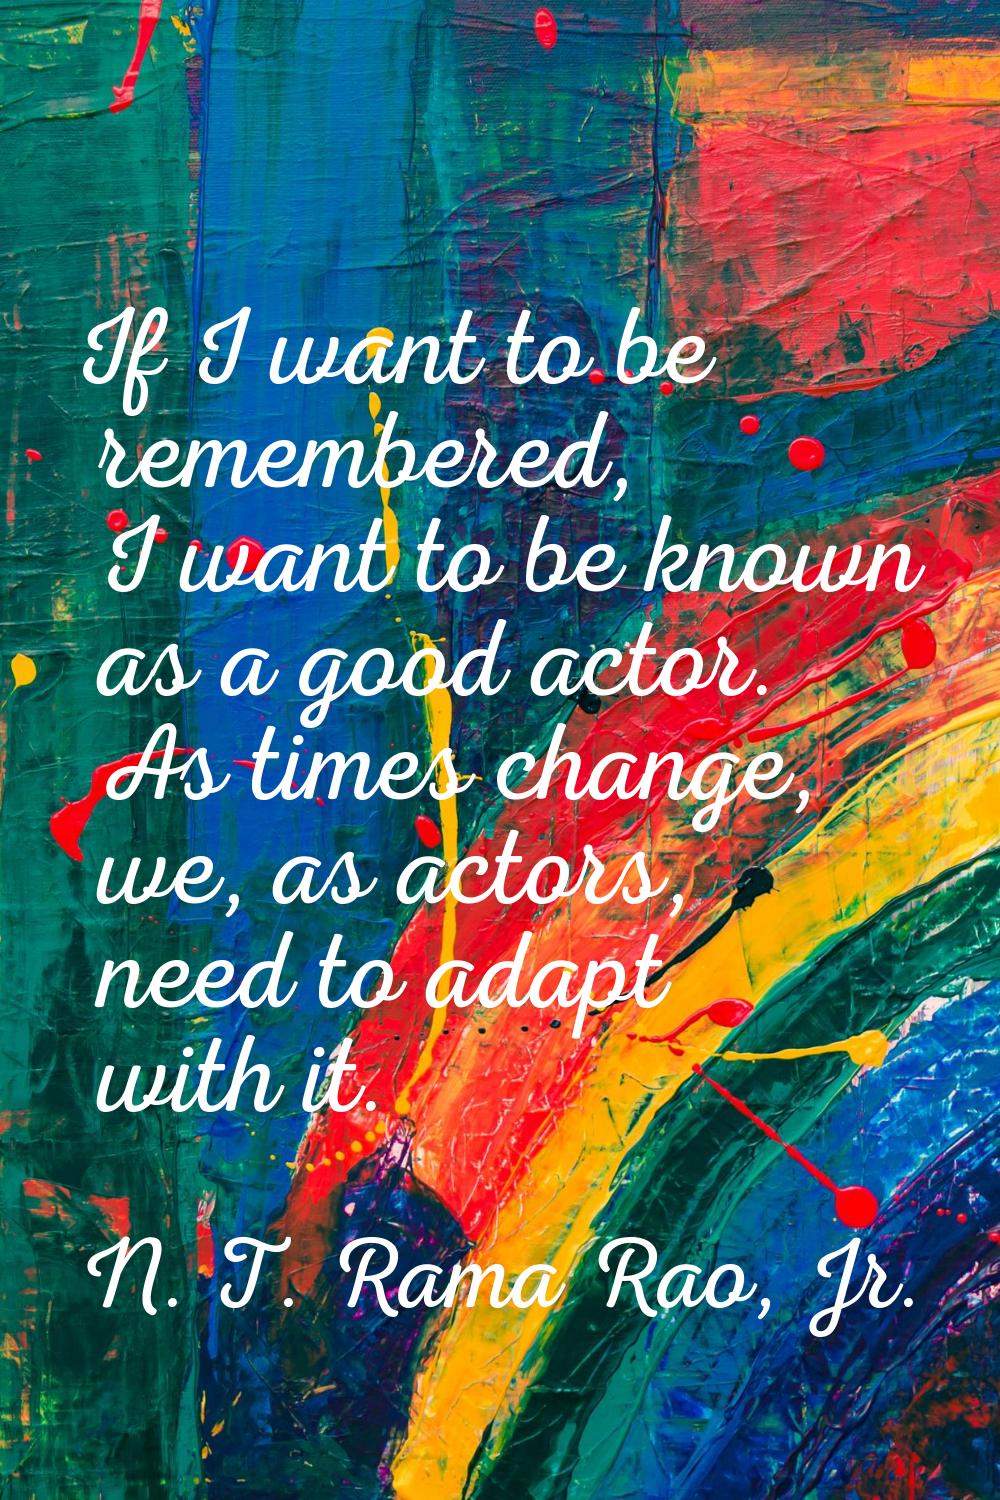 If I want to be remembered, I want to be known as a good actor. As times change, we, as actors, nee